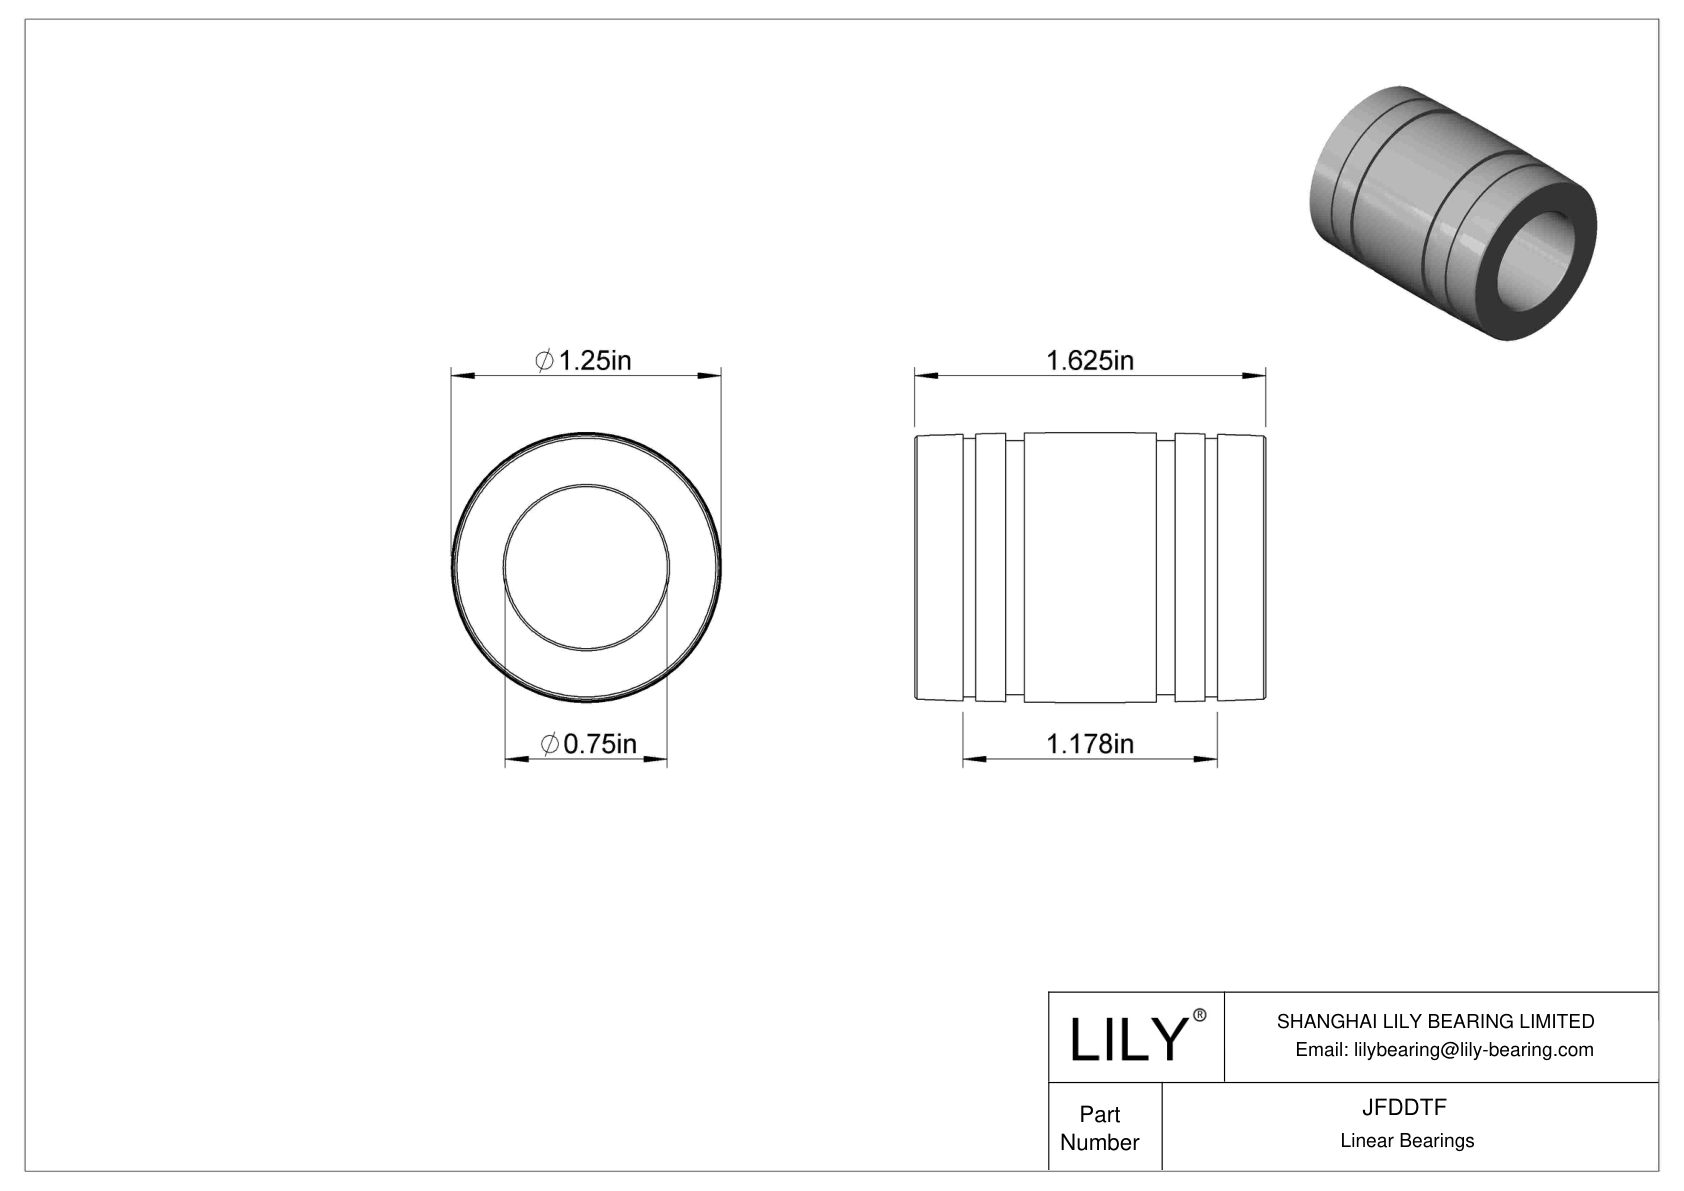 JFDDTF Common Linear Sleeve Bearings cad drawing